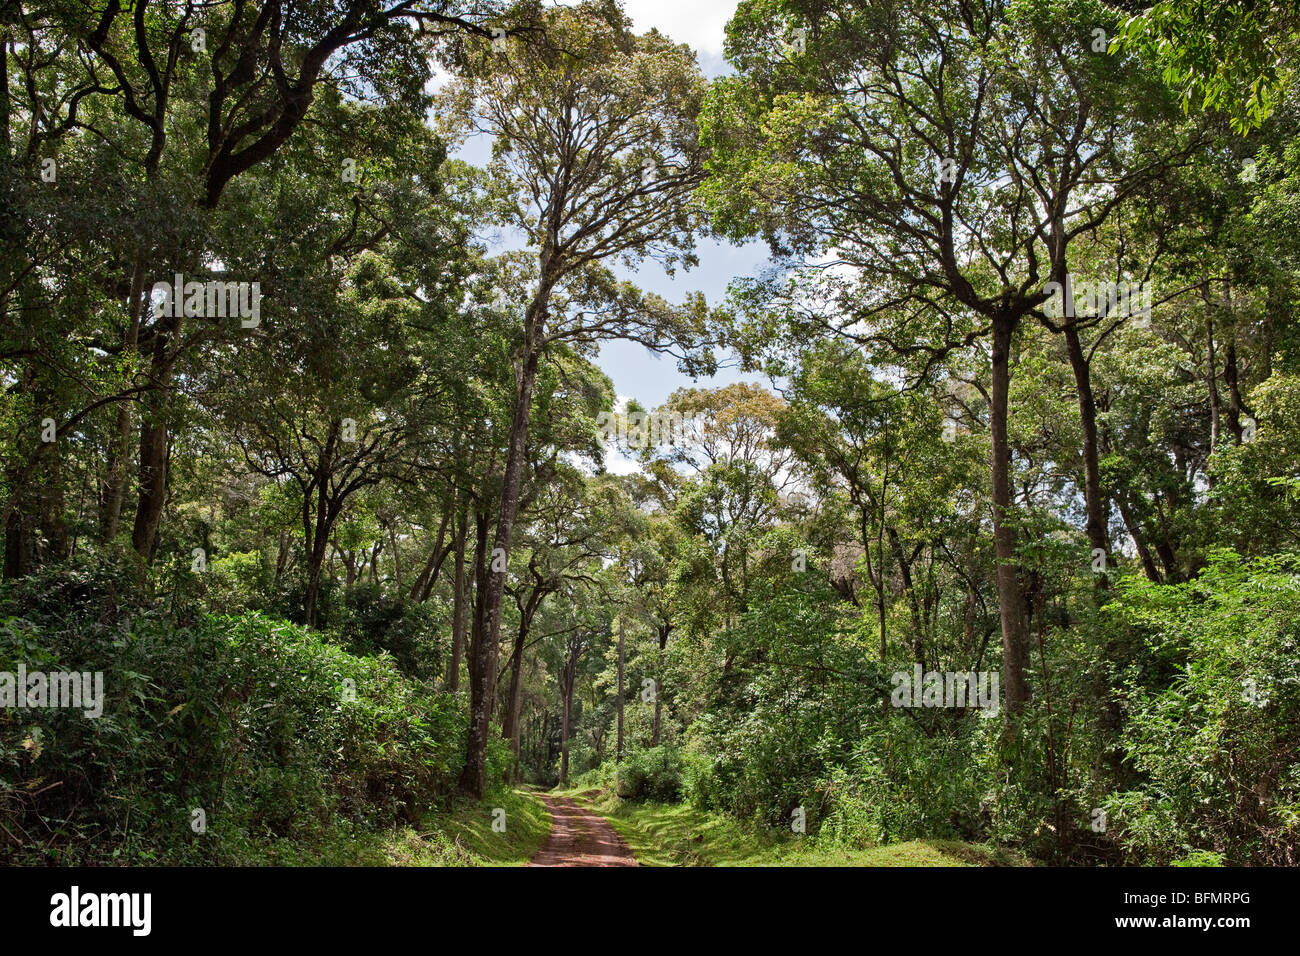 A forest track on the slopes of Mount Elgon, Kenya  s second highest mountain of volcanic origin. Stock Photo